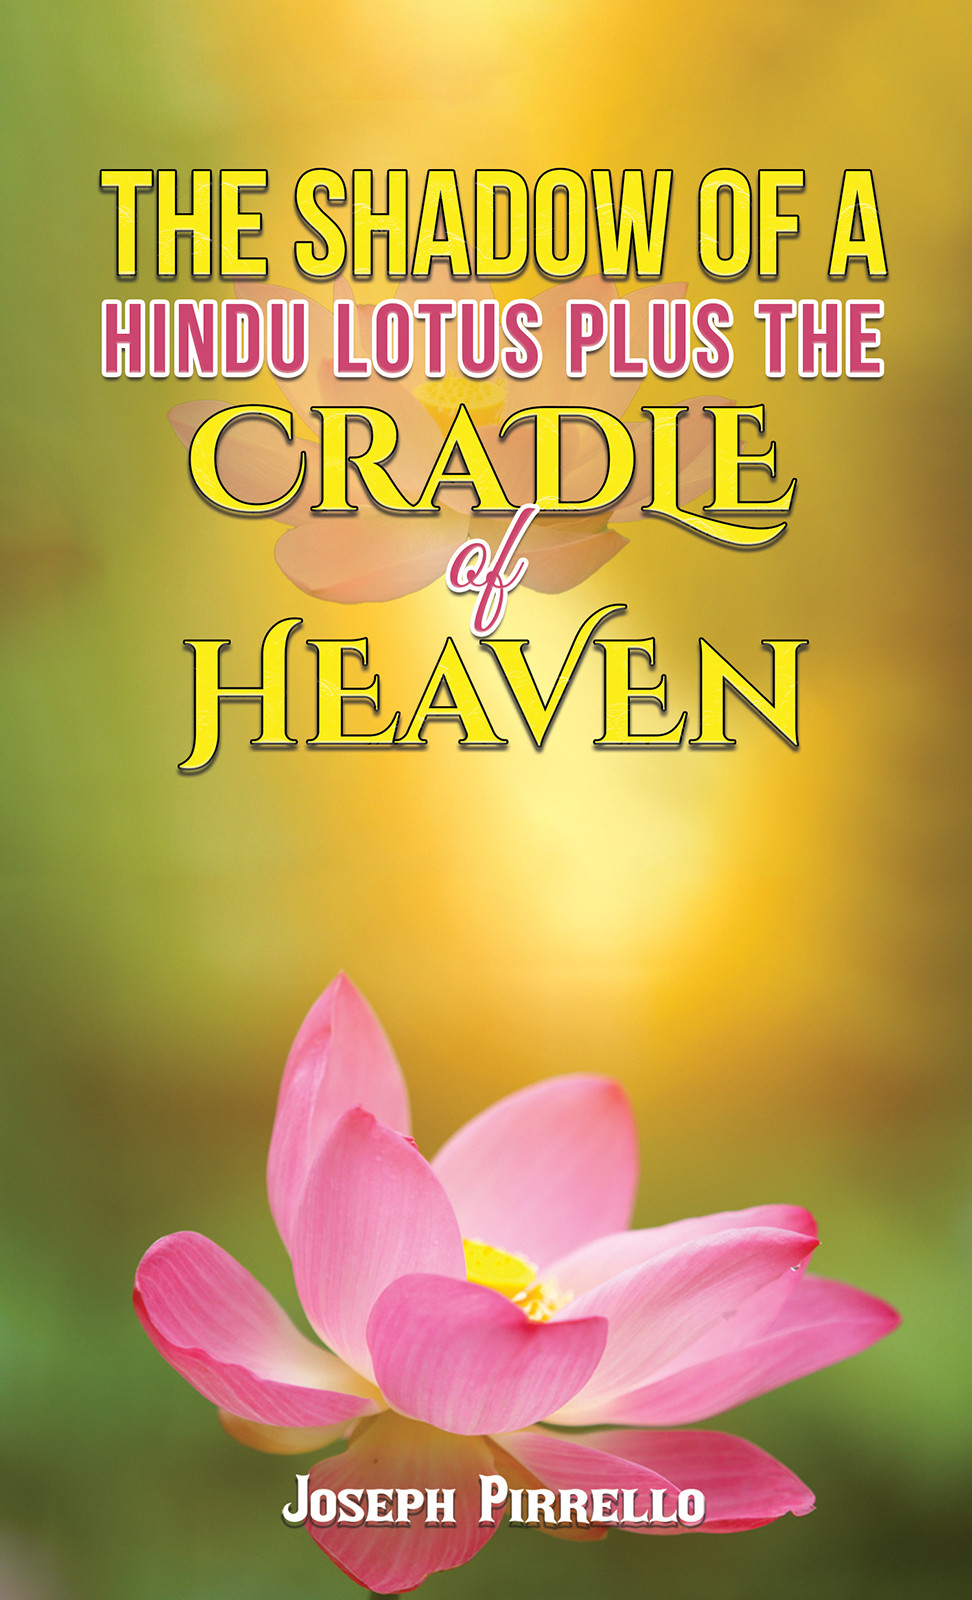 The Shadow of a Hindu Lotus Plus the Cradle of Heaven